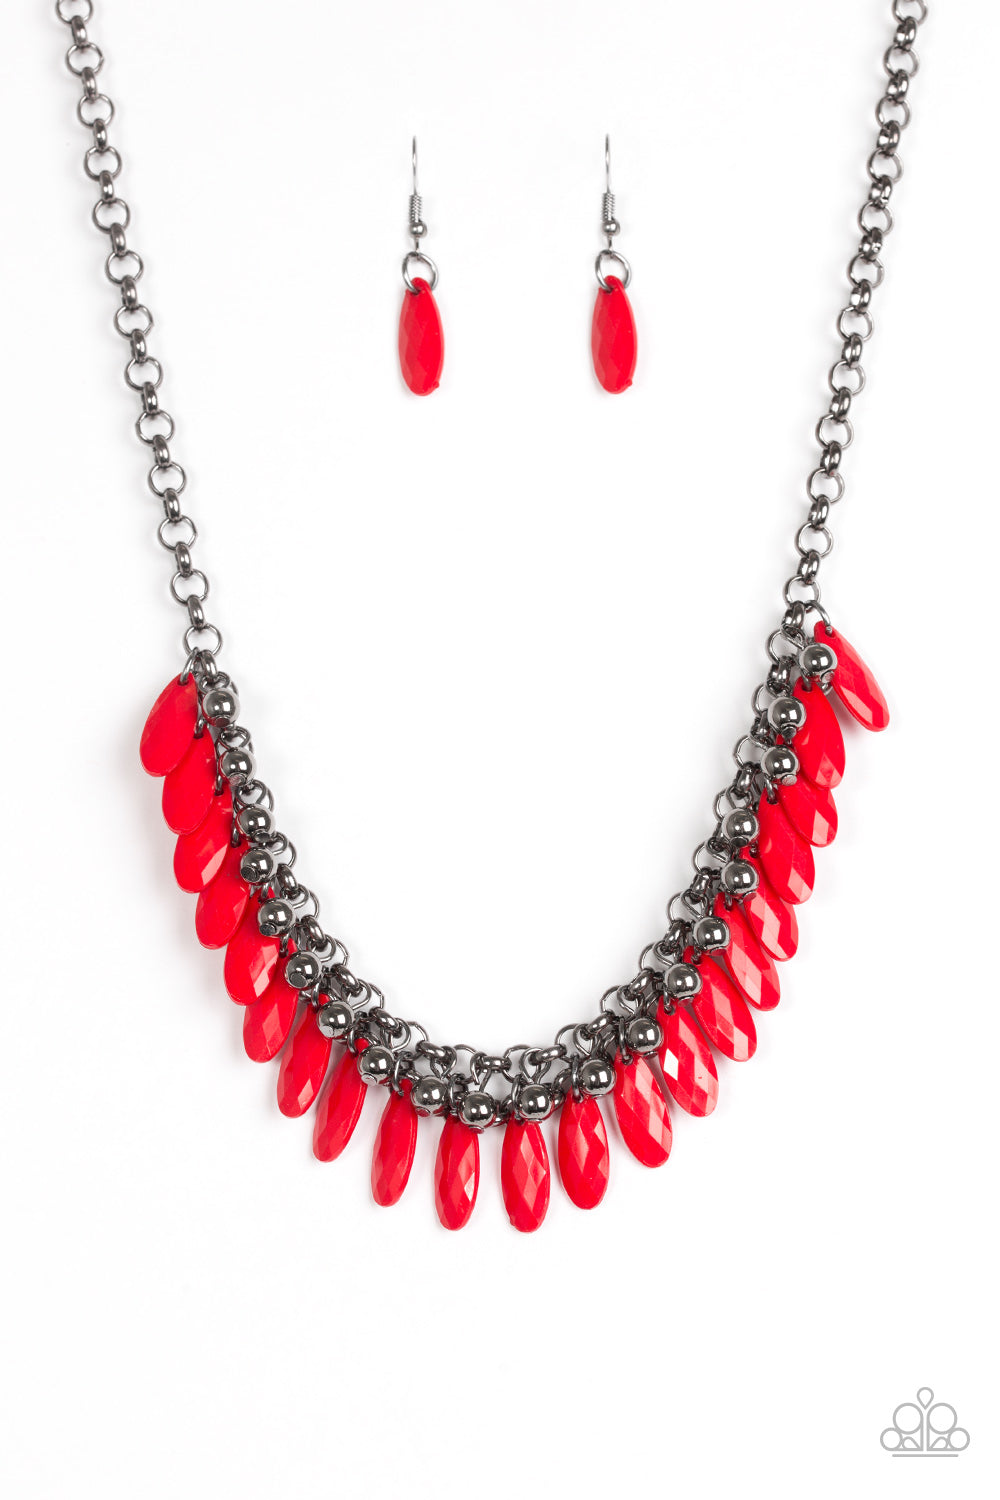 Paparazzi Jersey Shore Red Teardrop And Black Bead Gunmetal Necklace 